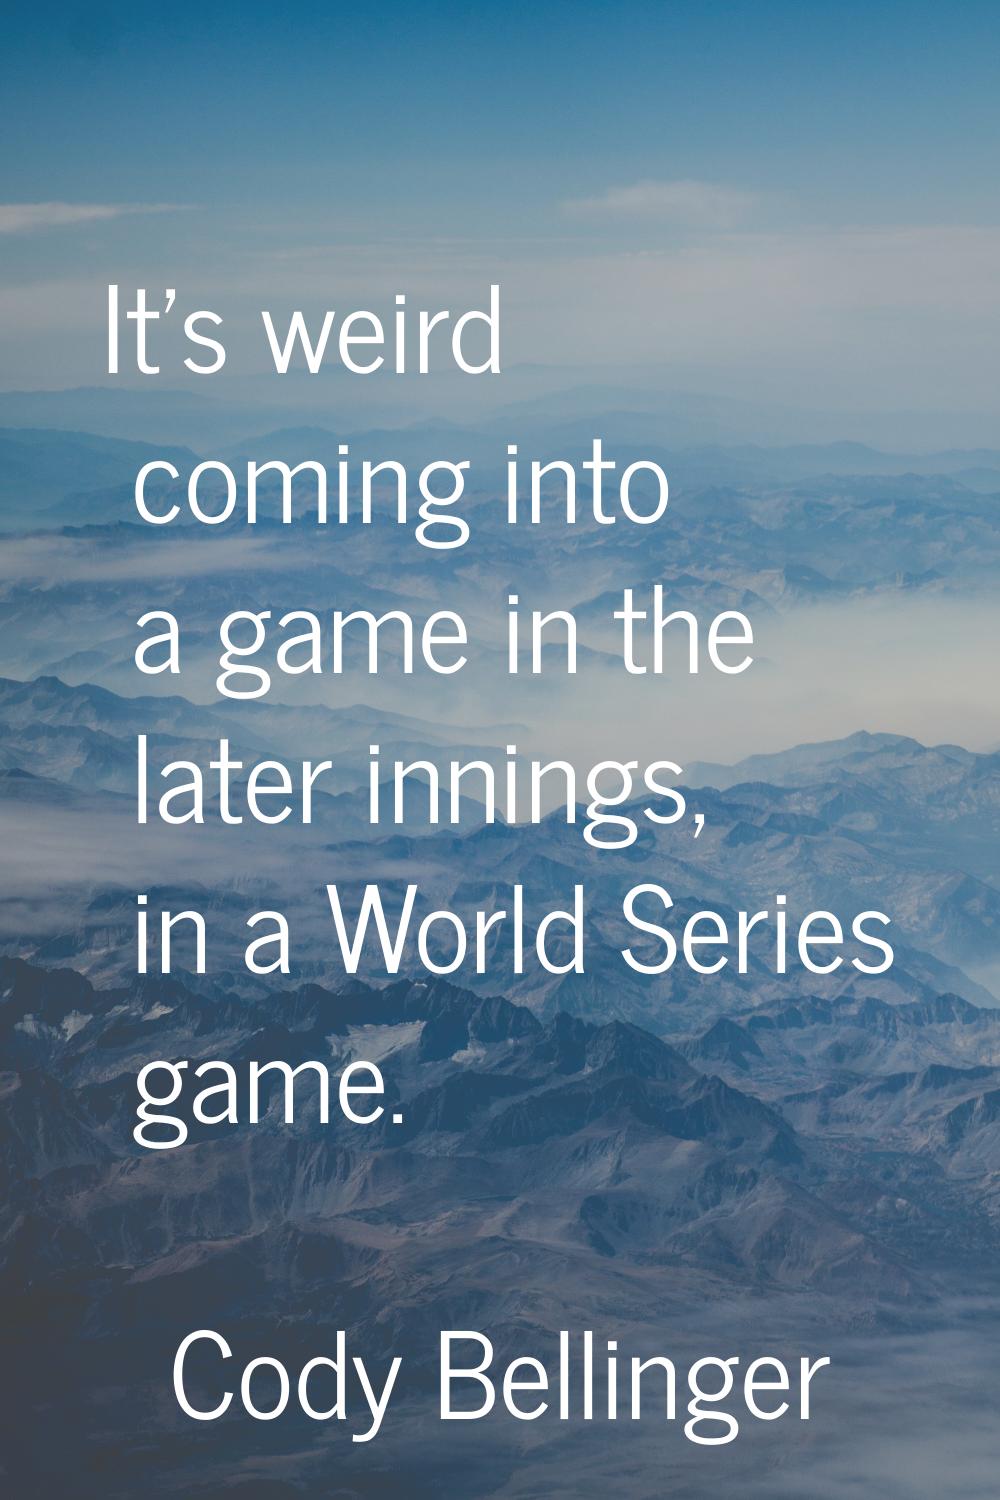 It's weird coming into a game in the later innings, in a World Series game.